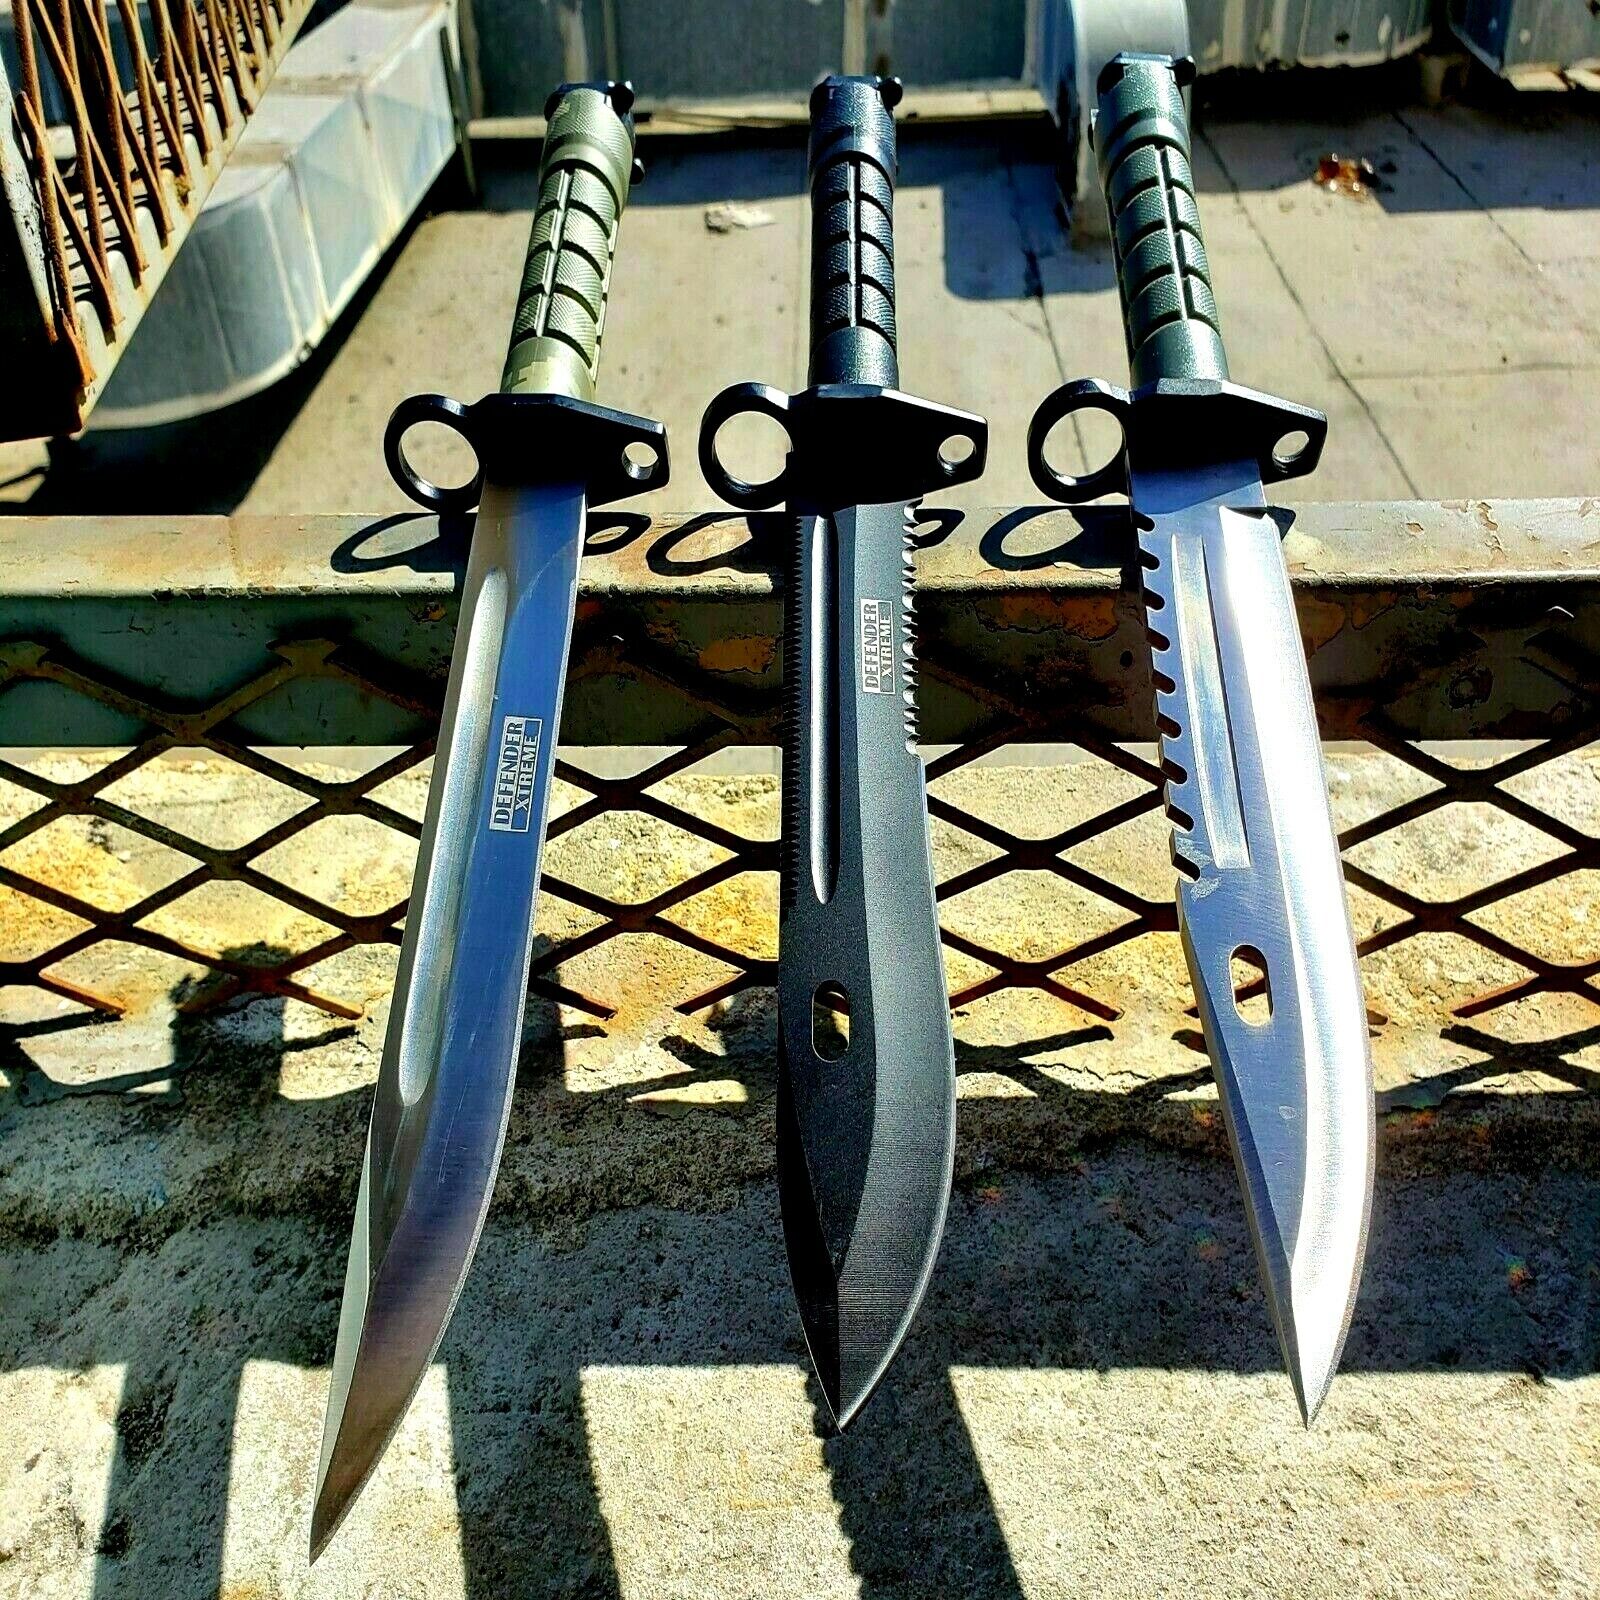 3 PC Military Survival Rambo Fixed Blade Hunting Knife Bayonet Tactical Bowie Defender